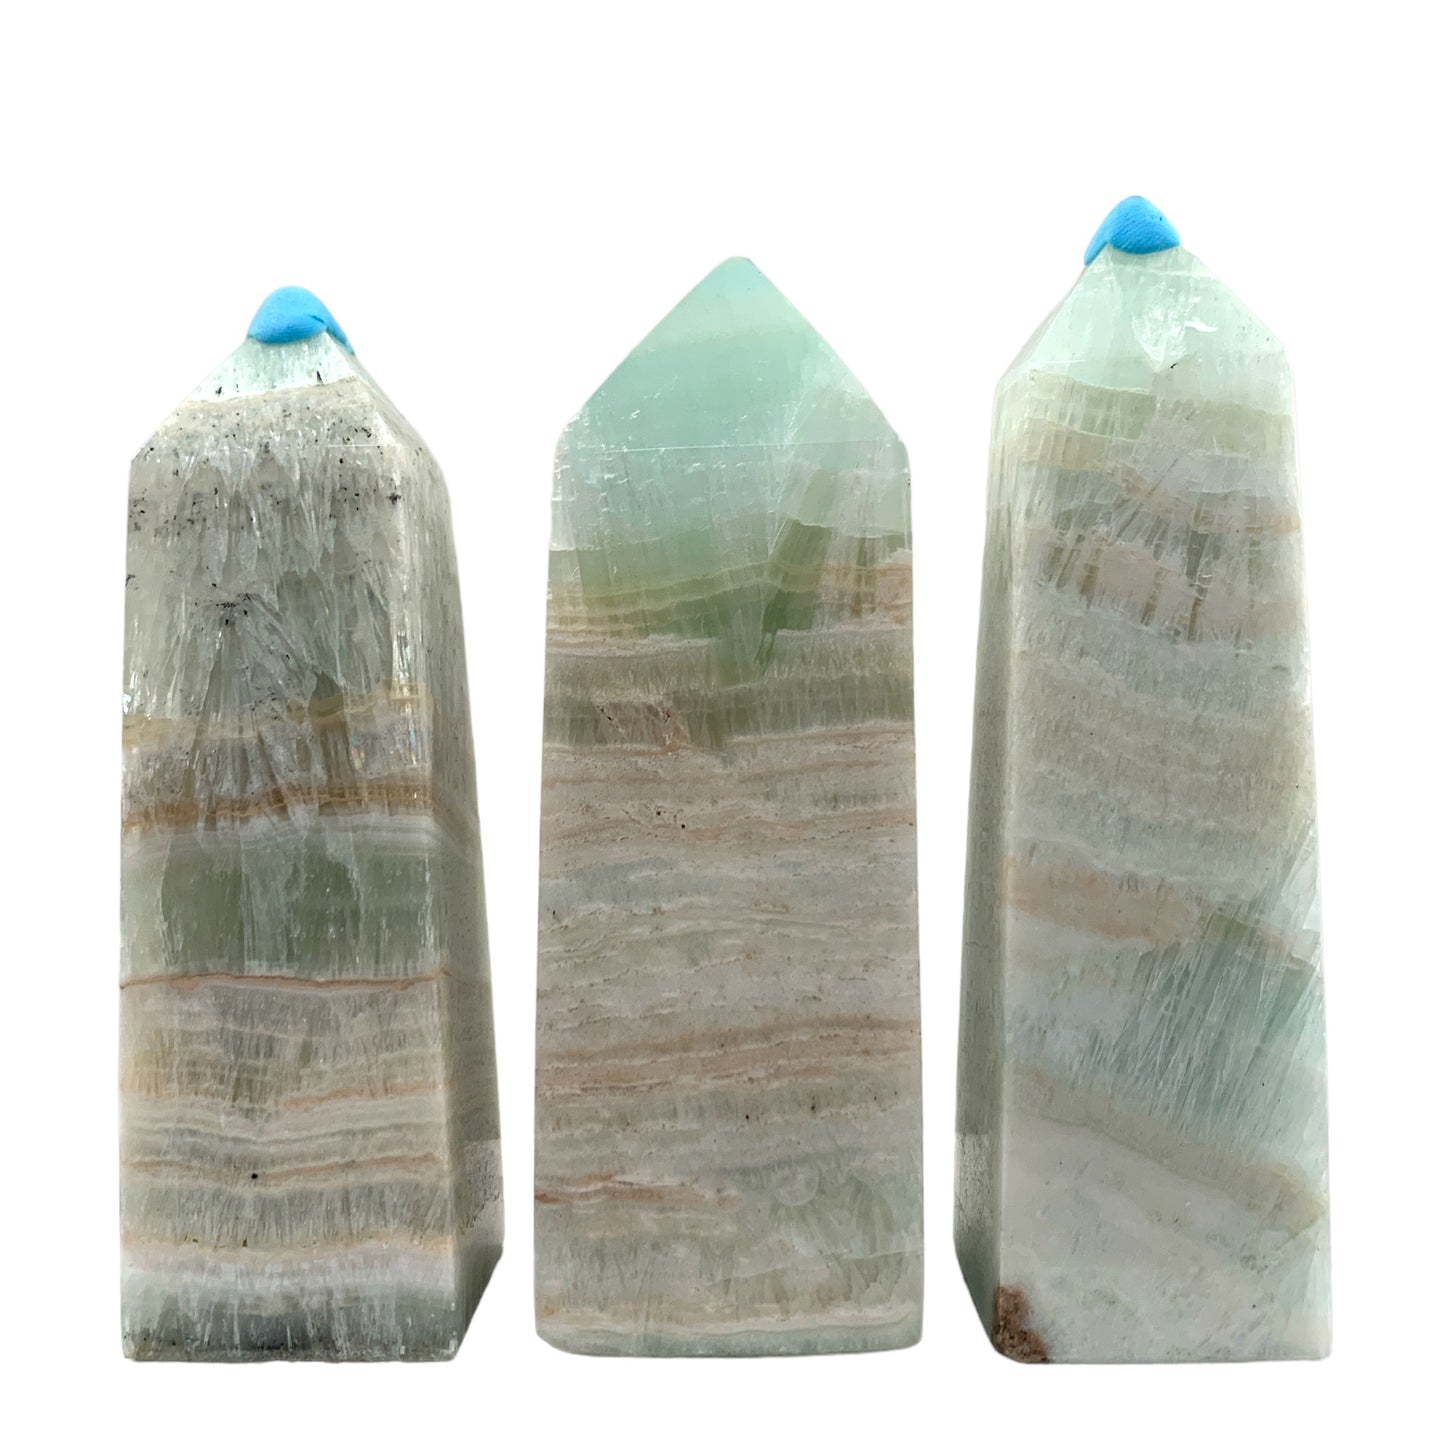 Pistachio Calcite - 75 to 110mm - Price per gram - B2B ordering 1 = 1 Tower so we charge Ex. 187g = $31.80 each - NEW622 - Polished Towers Points